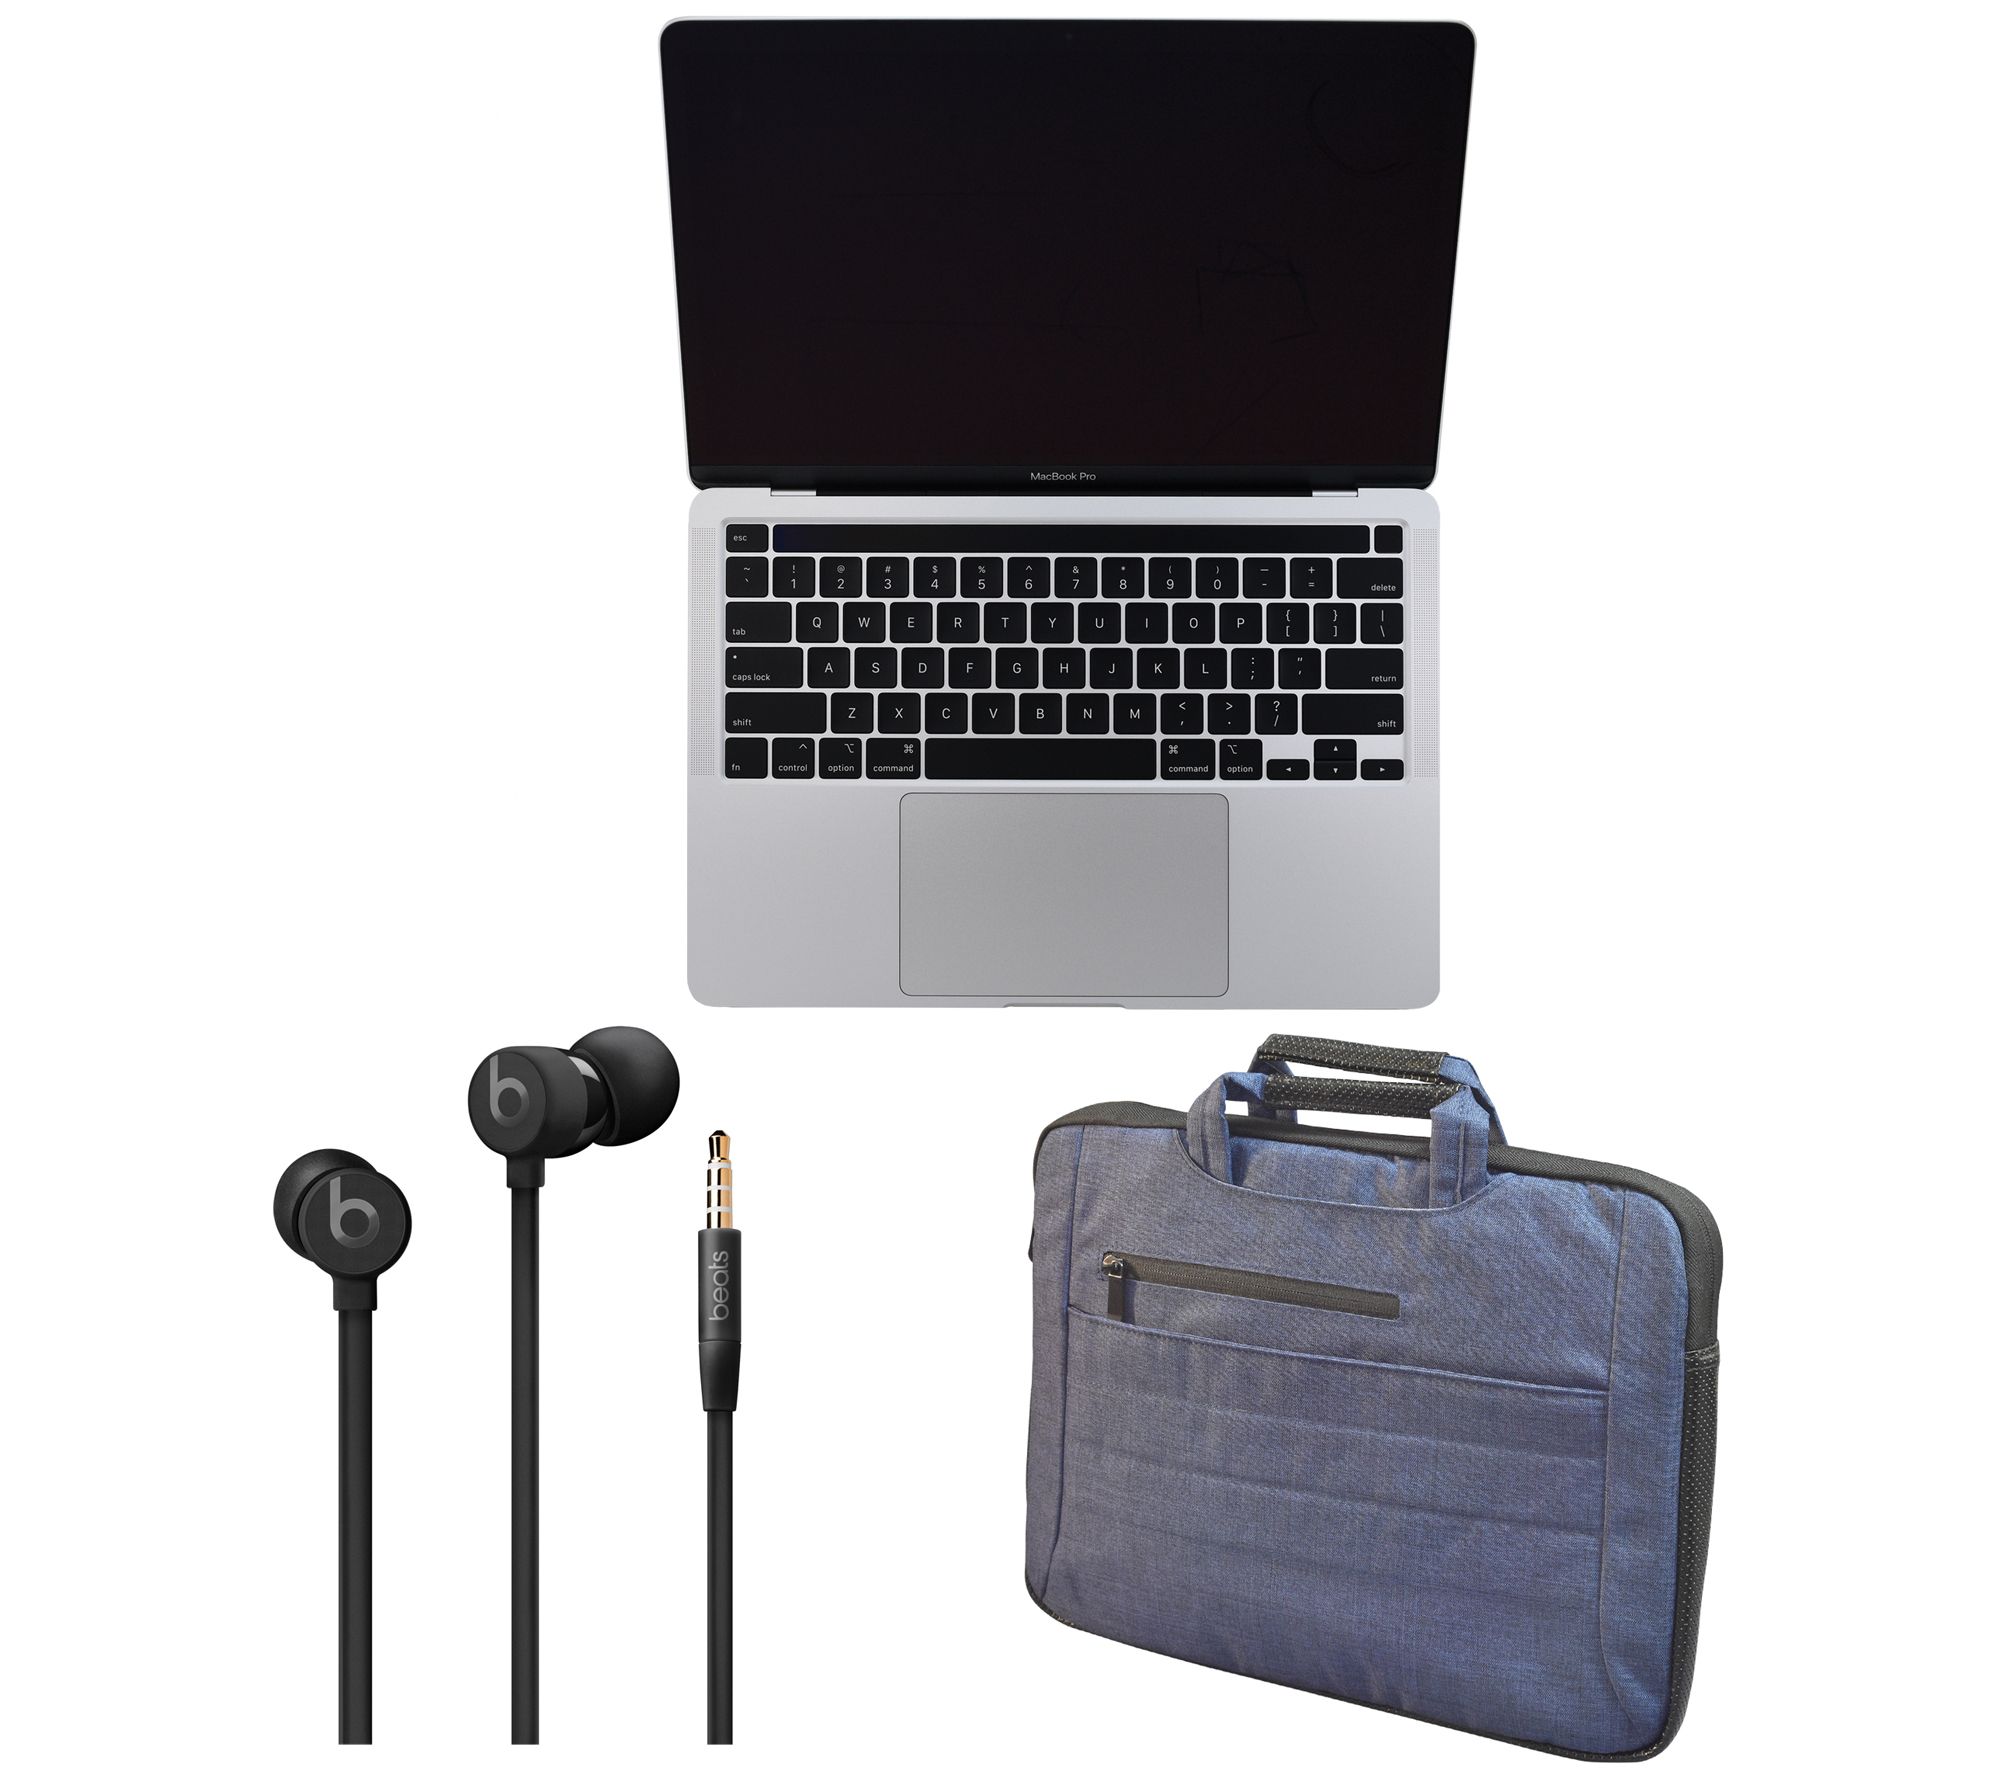 urbeats3 carrying case